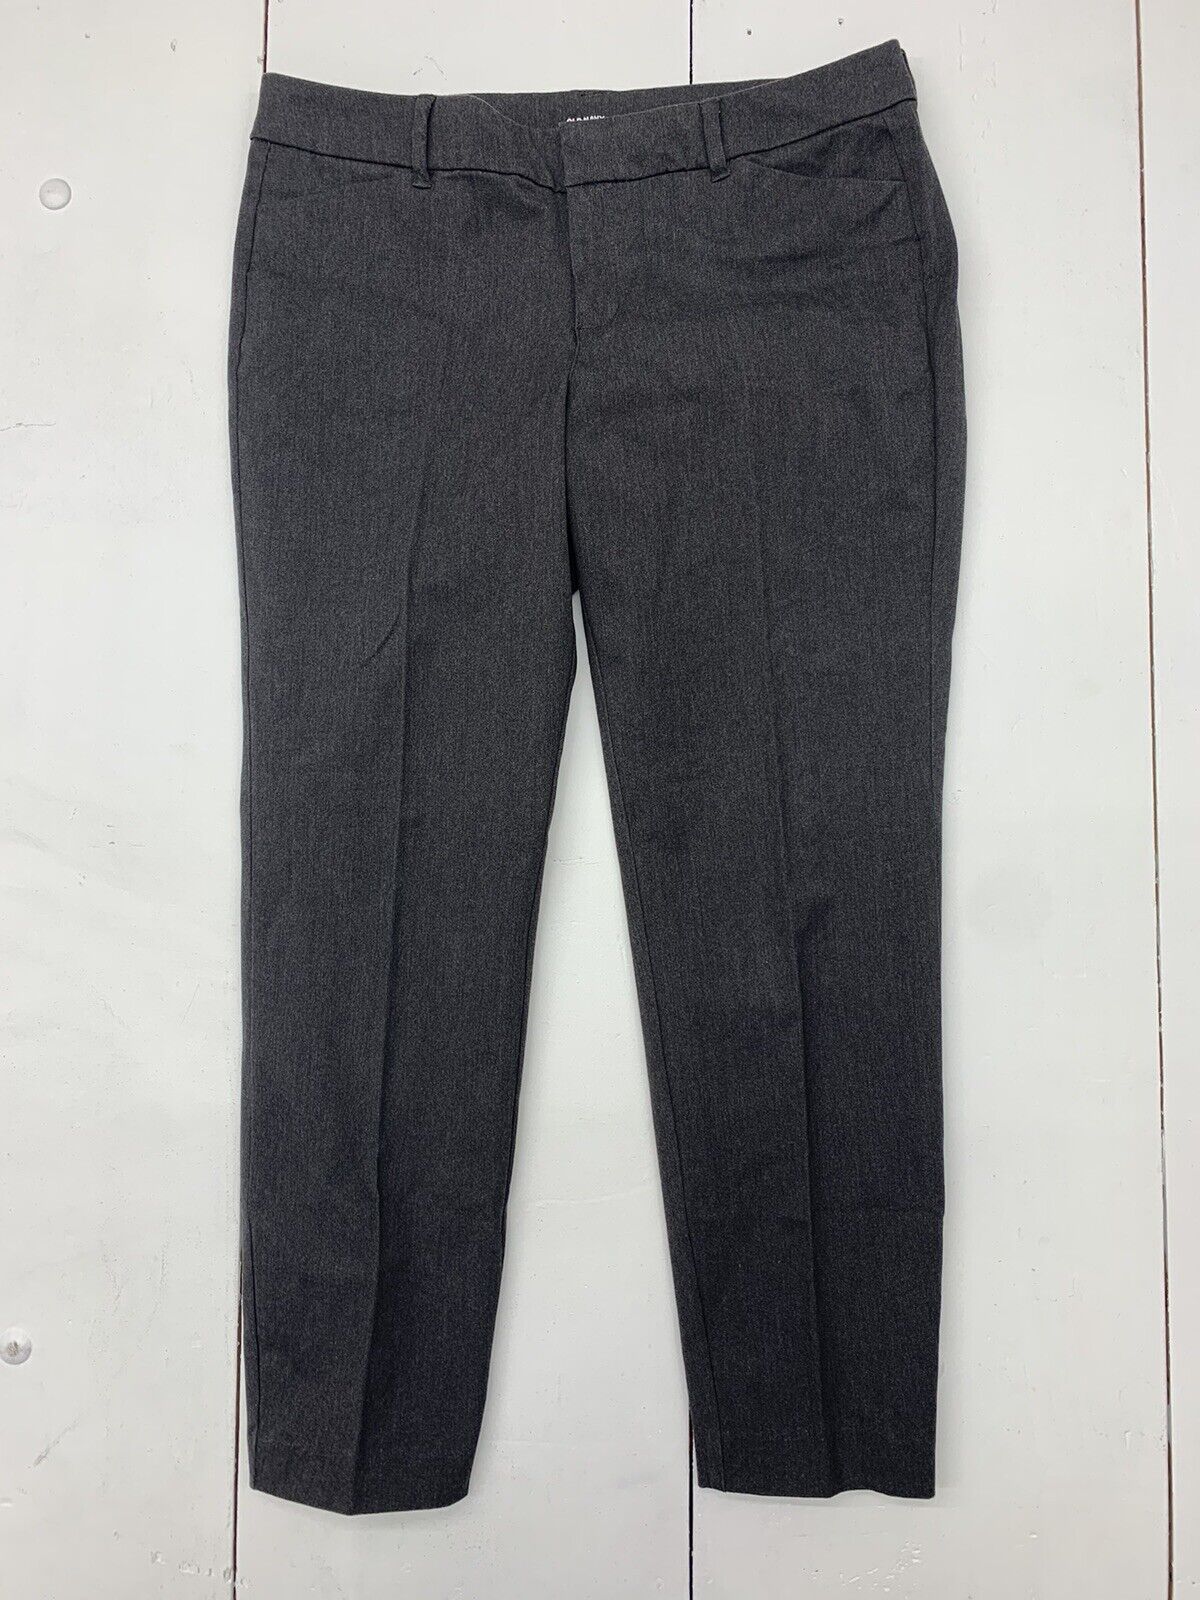 Old Navy Womens Grey Pixie Pants Size 12 - beyond exchange